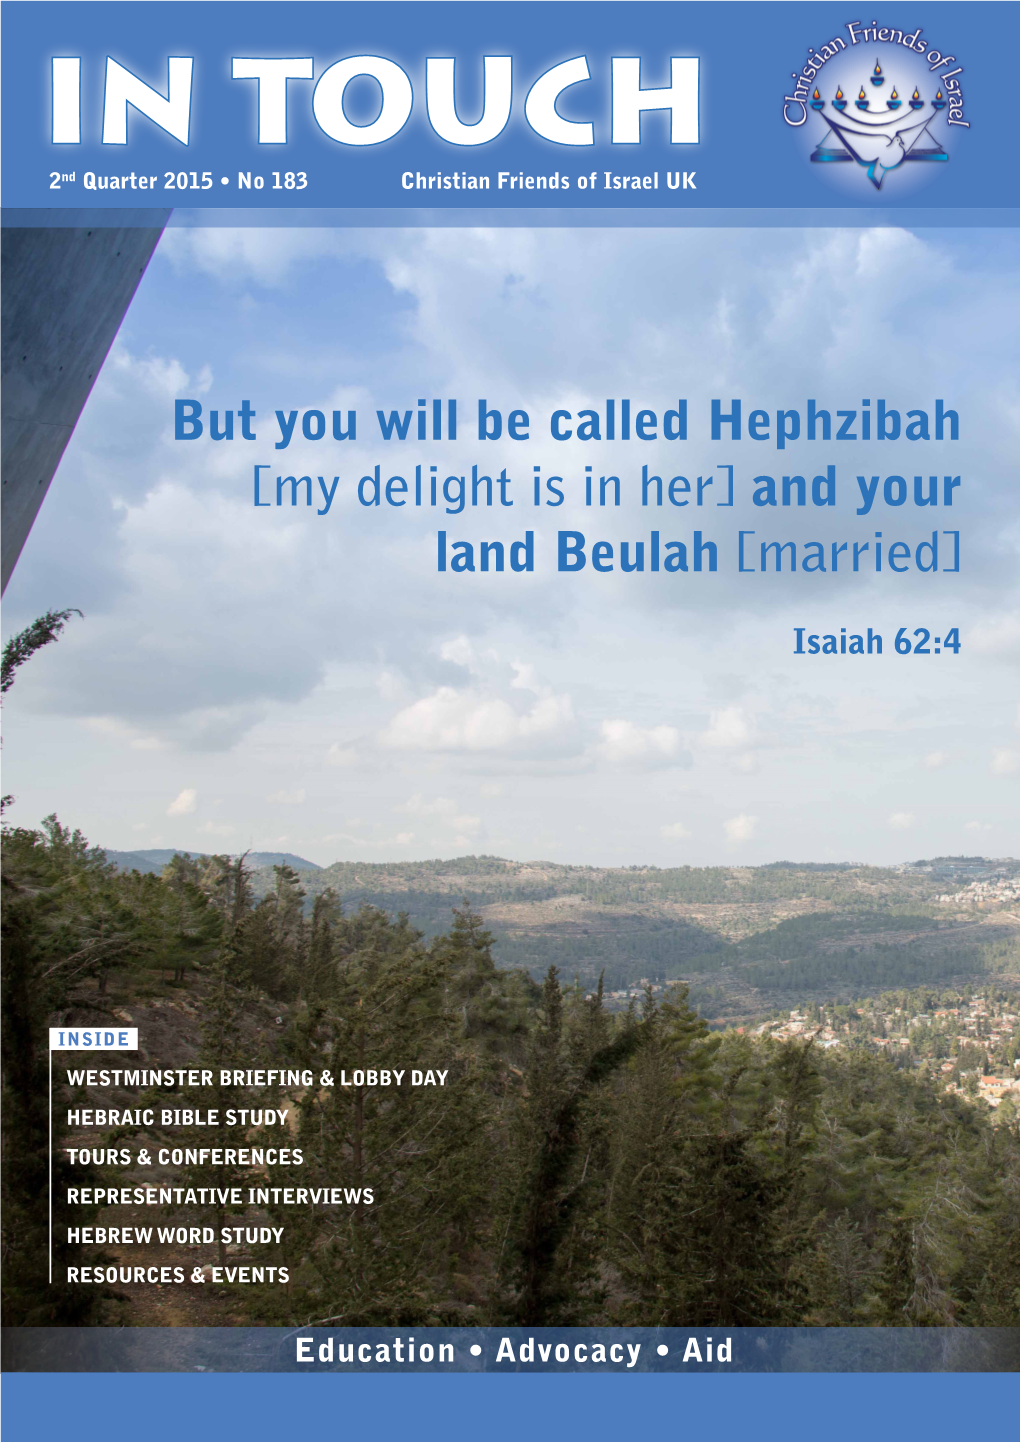 But You Will Be Called Hephzibah [My Delight Is in Her] and Your Land Beulah [Married]